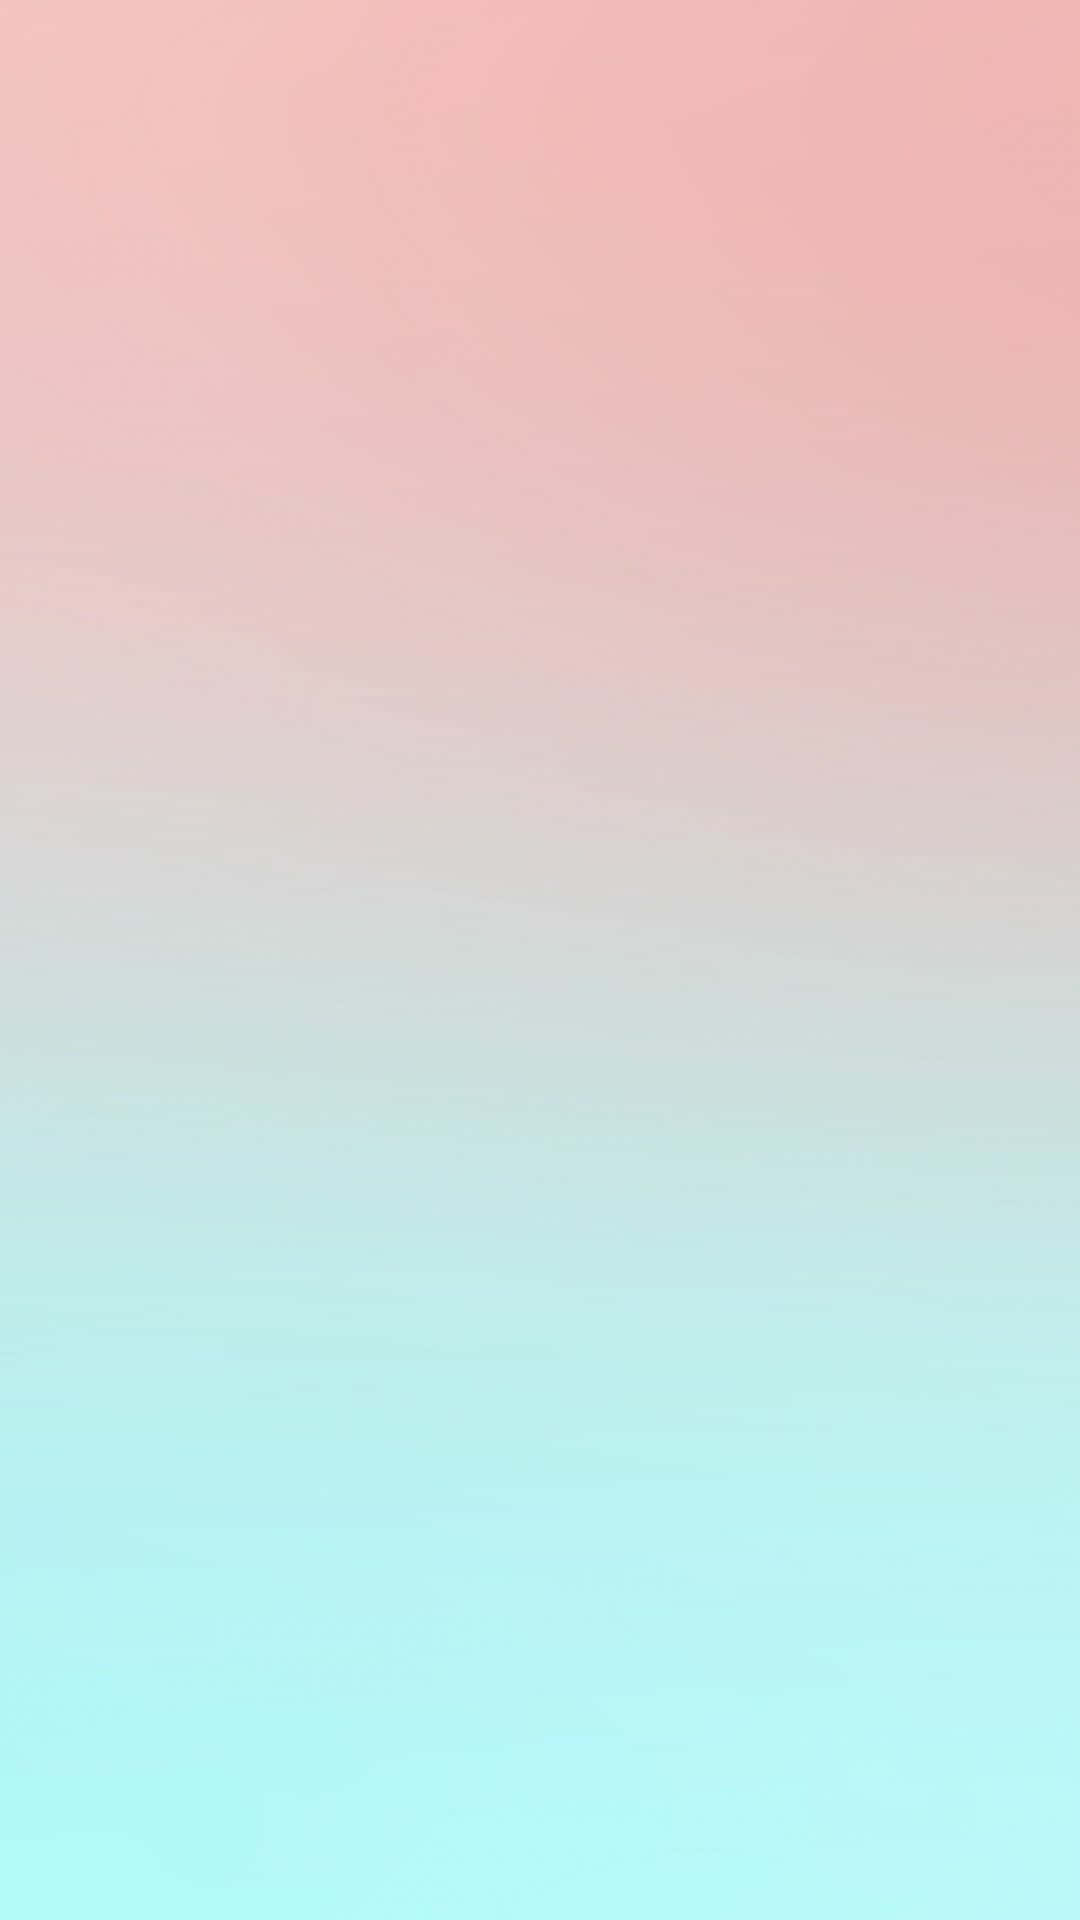 Minimalist Red And Blue Iphone Wallpaper